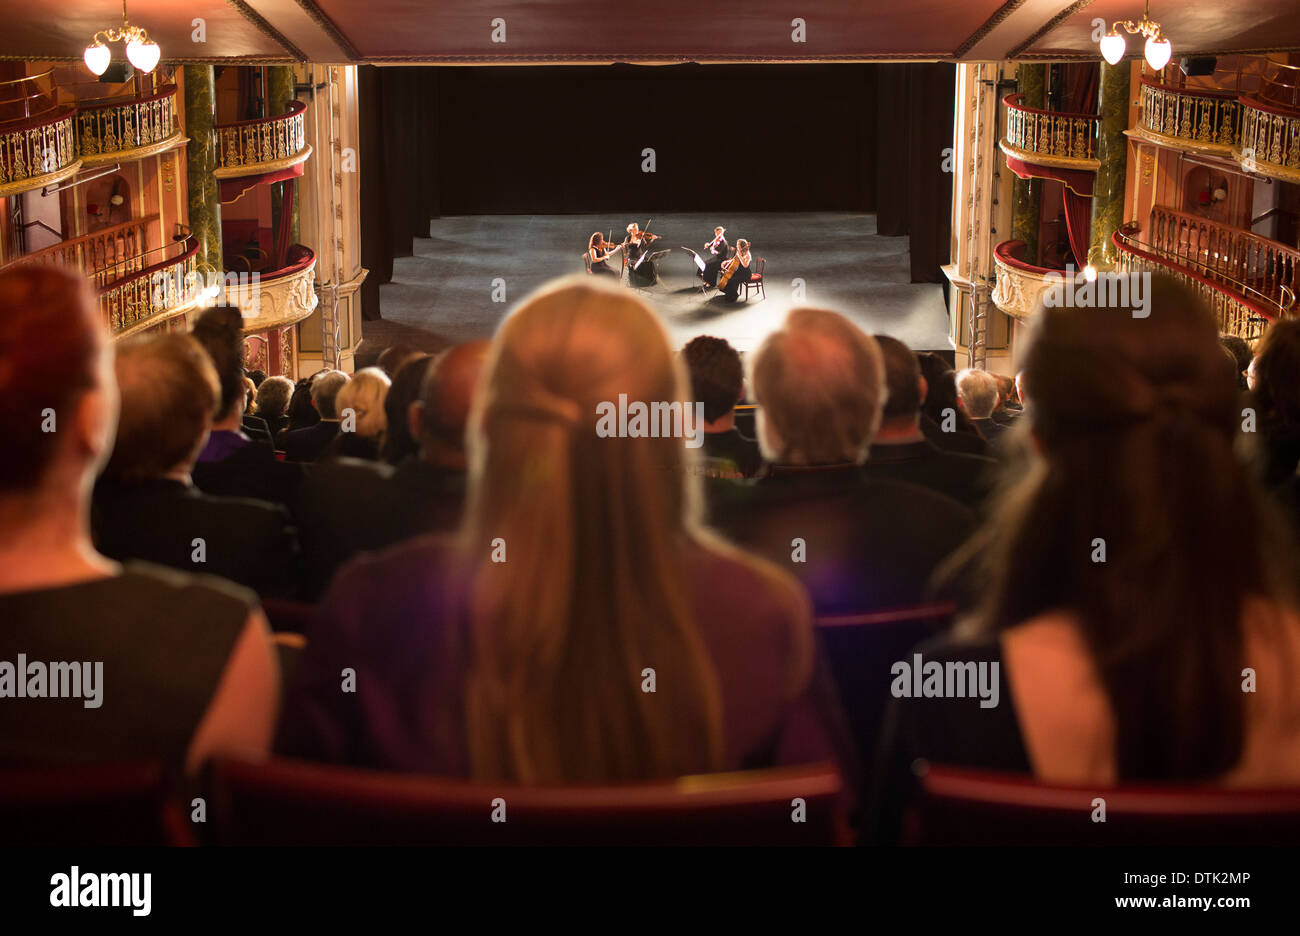 Audience watching quarter perform on stage in theater Stock Photo